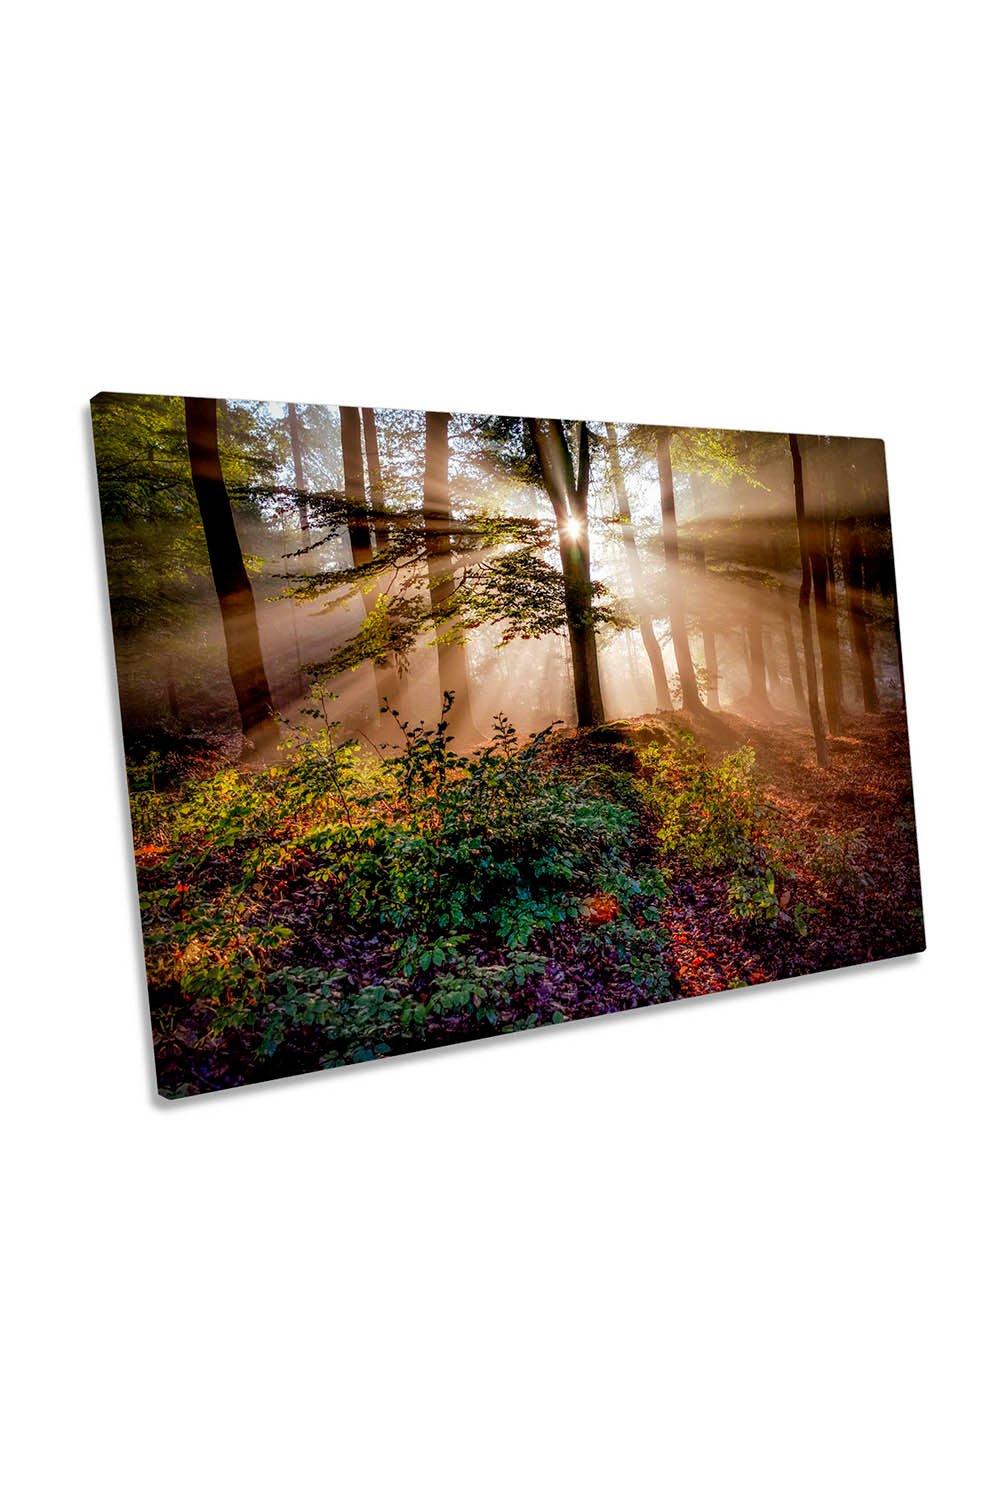 Magical Forest Sun Rays Autumn Canvas Wall Art Picture Print